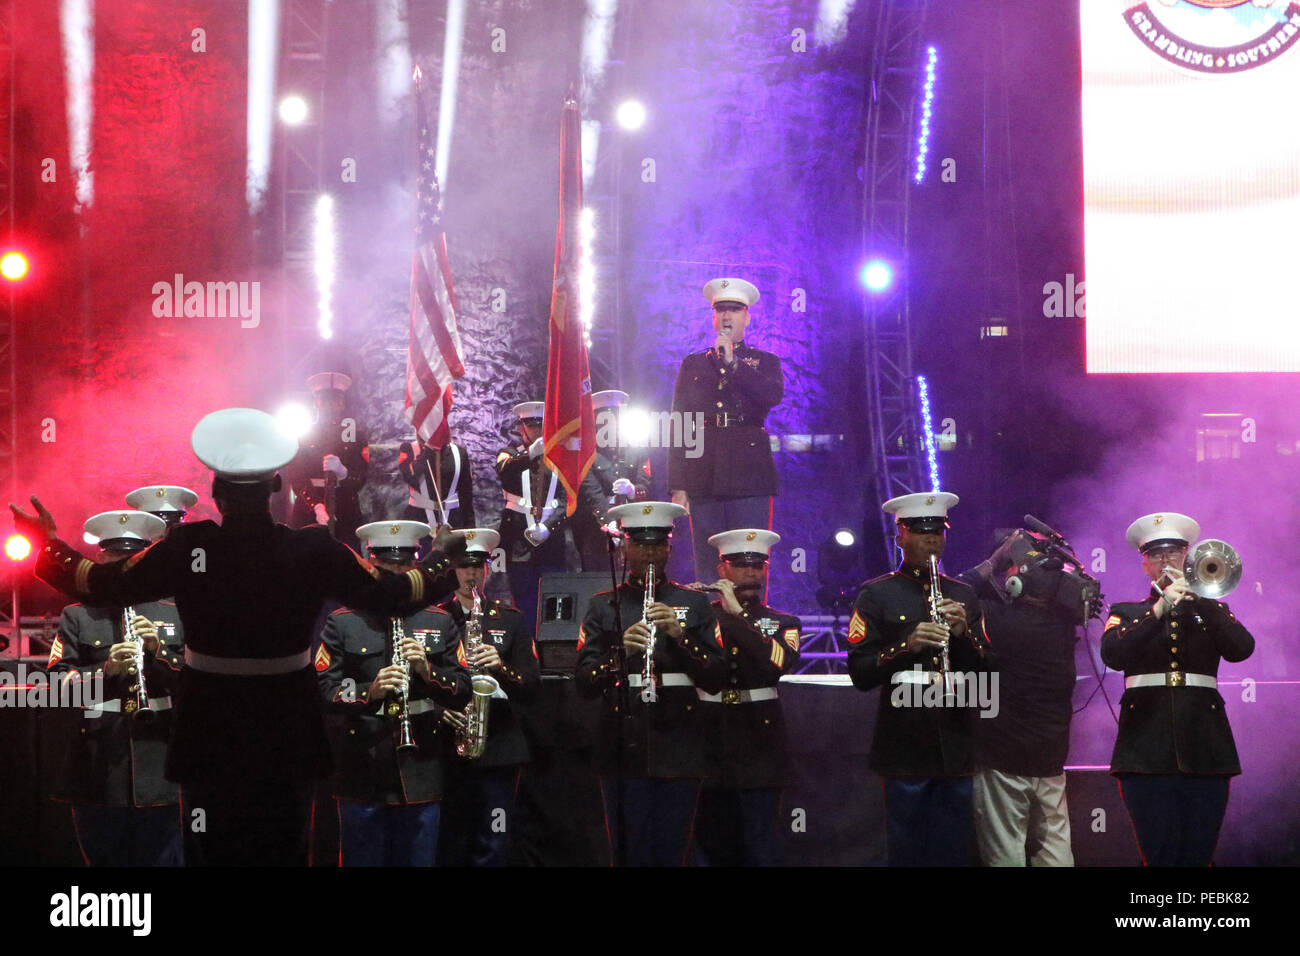 Chief Warrant Officer 3 Michael Smith, Marine Corps Band New Orleans officer in charge, sings the national anthem during the Bayou Classic Battle of the Bands show on Nov. 27, 2015. The Marine Corps has been partners with the Bayou Classic for the past 15 years as a way to connect and strengthen the United States Marine Corps’ relationship with Historically Black College Universities while also reinforcing the idea of the armed services as a viable career option for college and high school graduates. (U.S. Marine Corps photo by Sgt. Rubin J. Tan/Released) Stock Photo